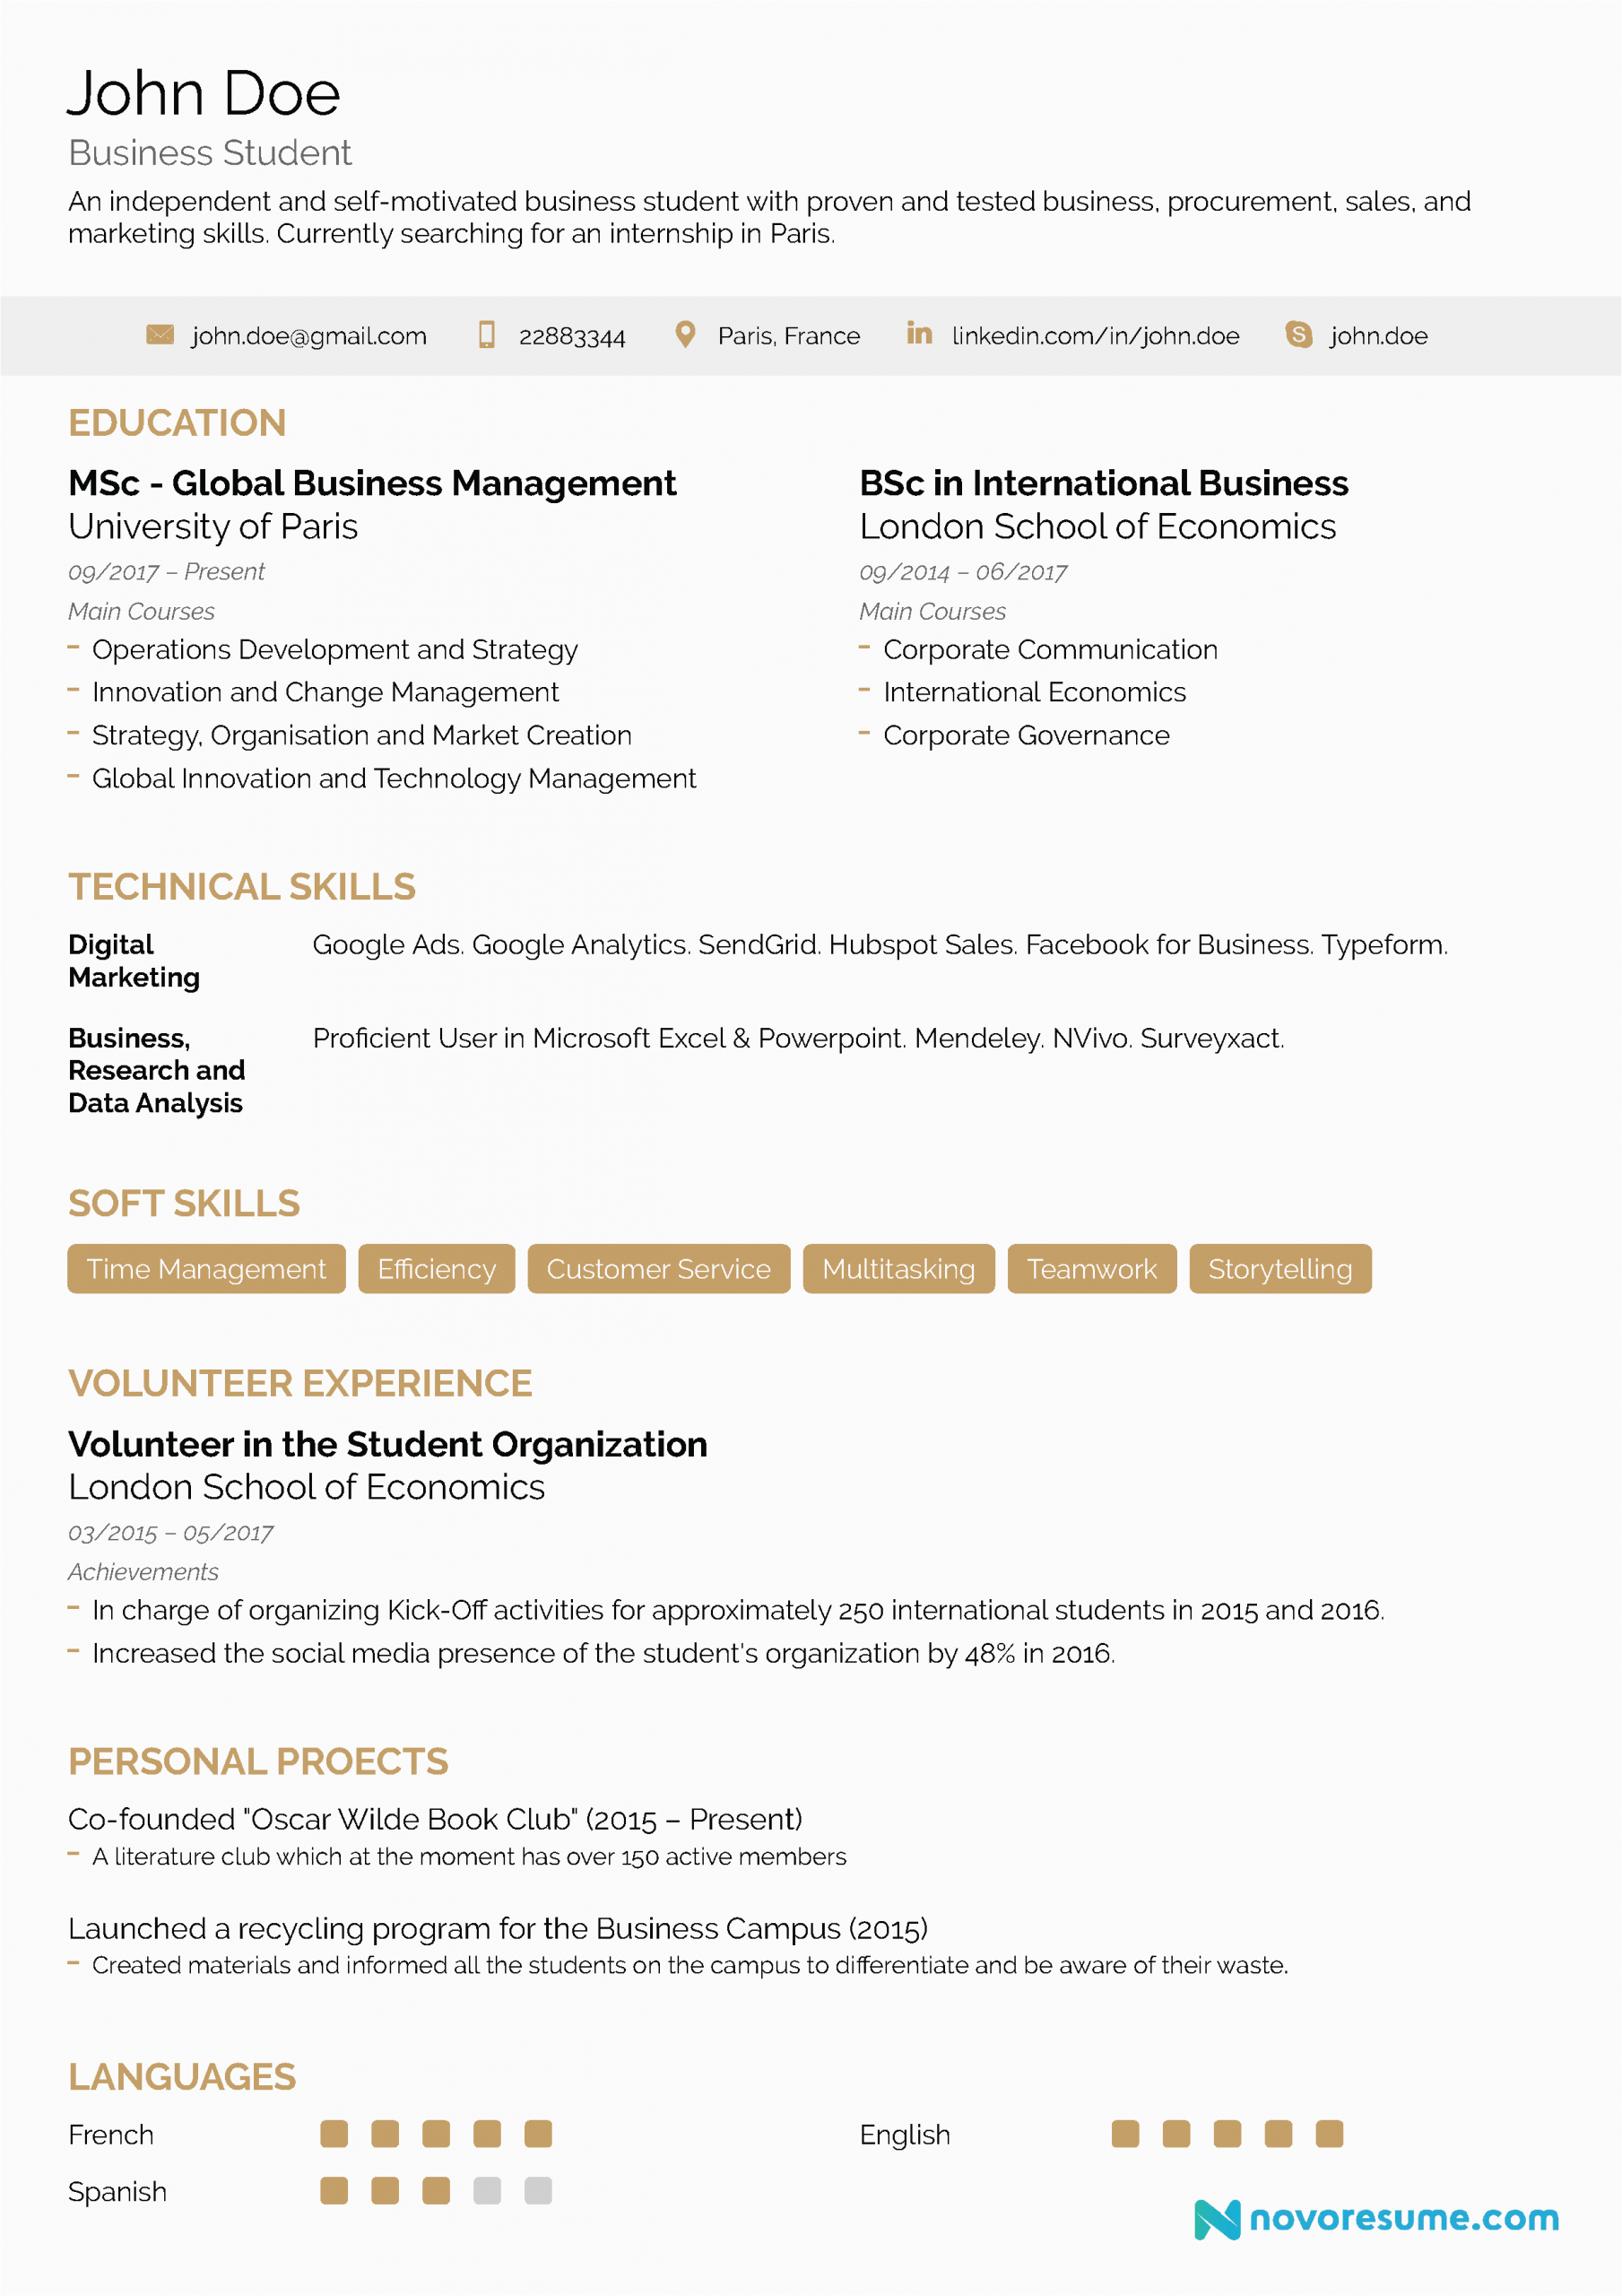 Sample Resume for No Experience Applicant How to Write A Resume with No Experience [21 Examples]